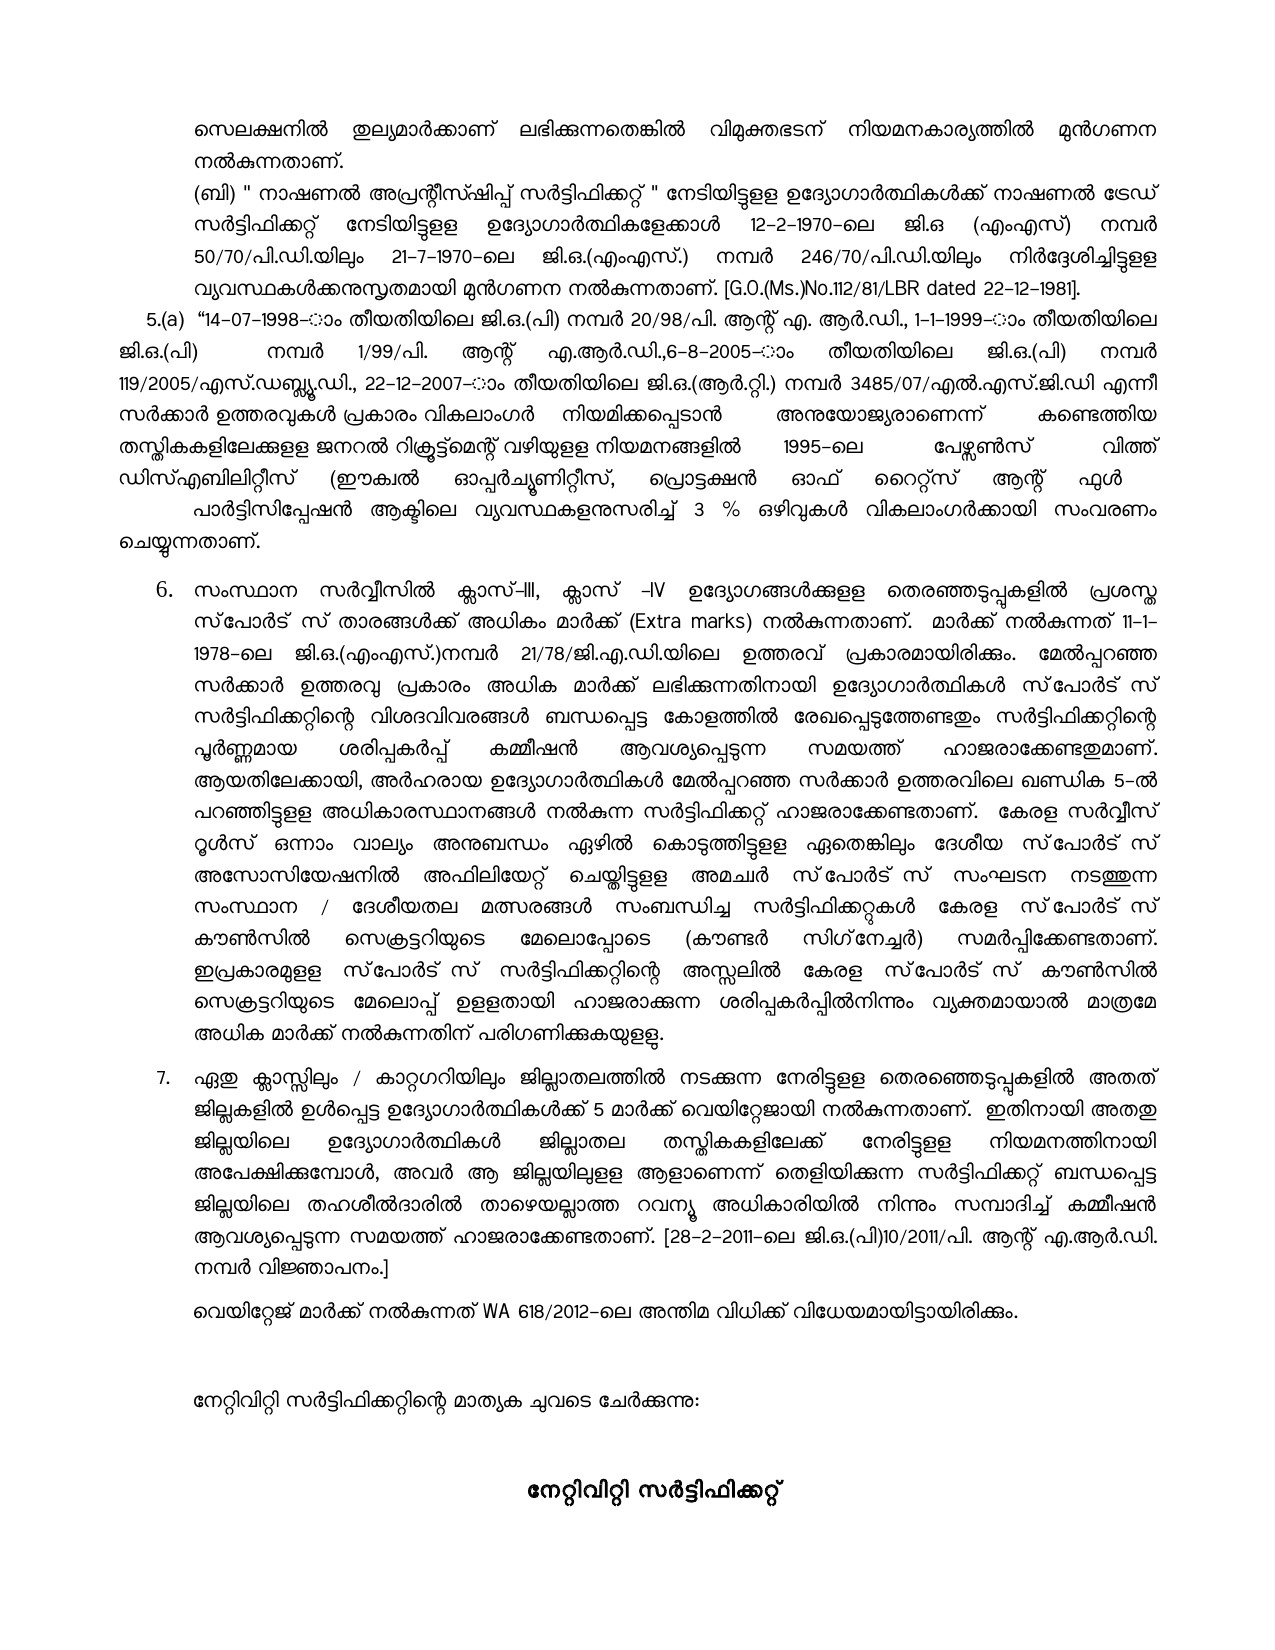 General Conditions and Certificate Formats in Malayalam - Notification Image 10